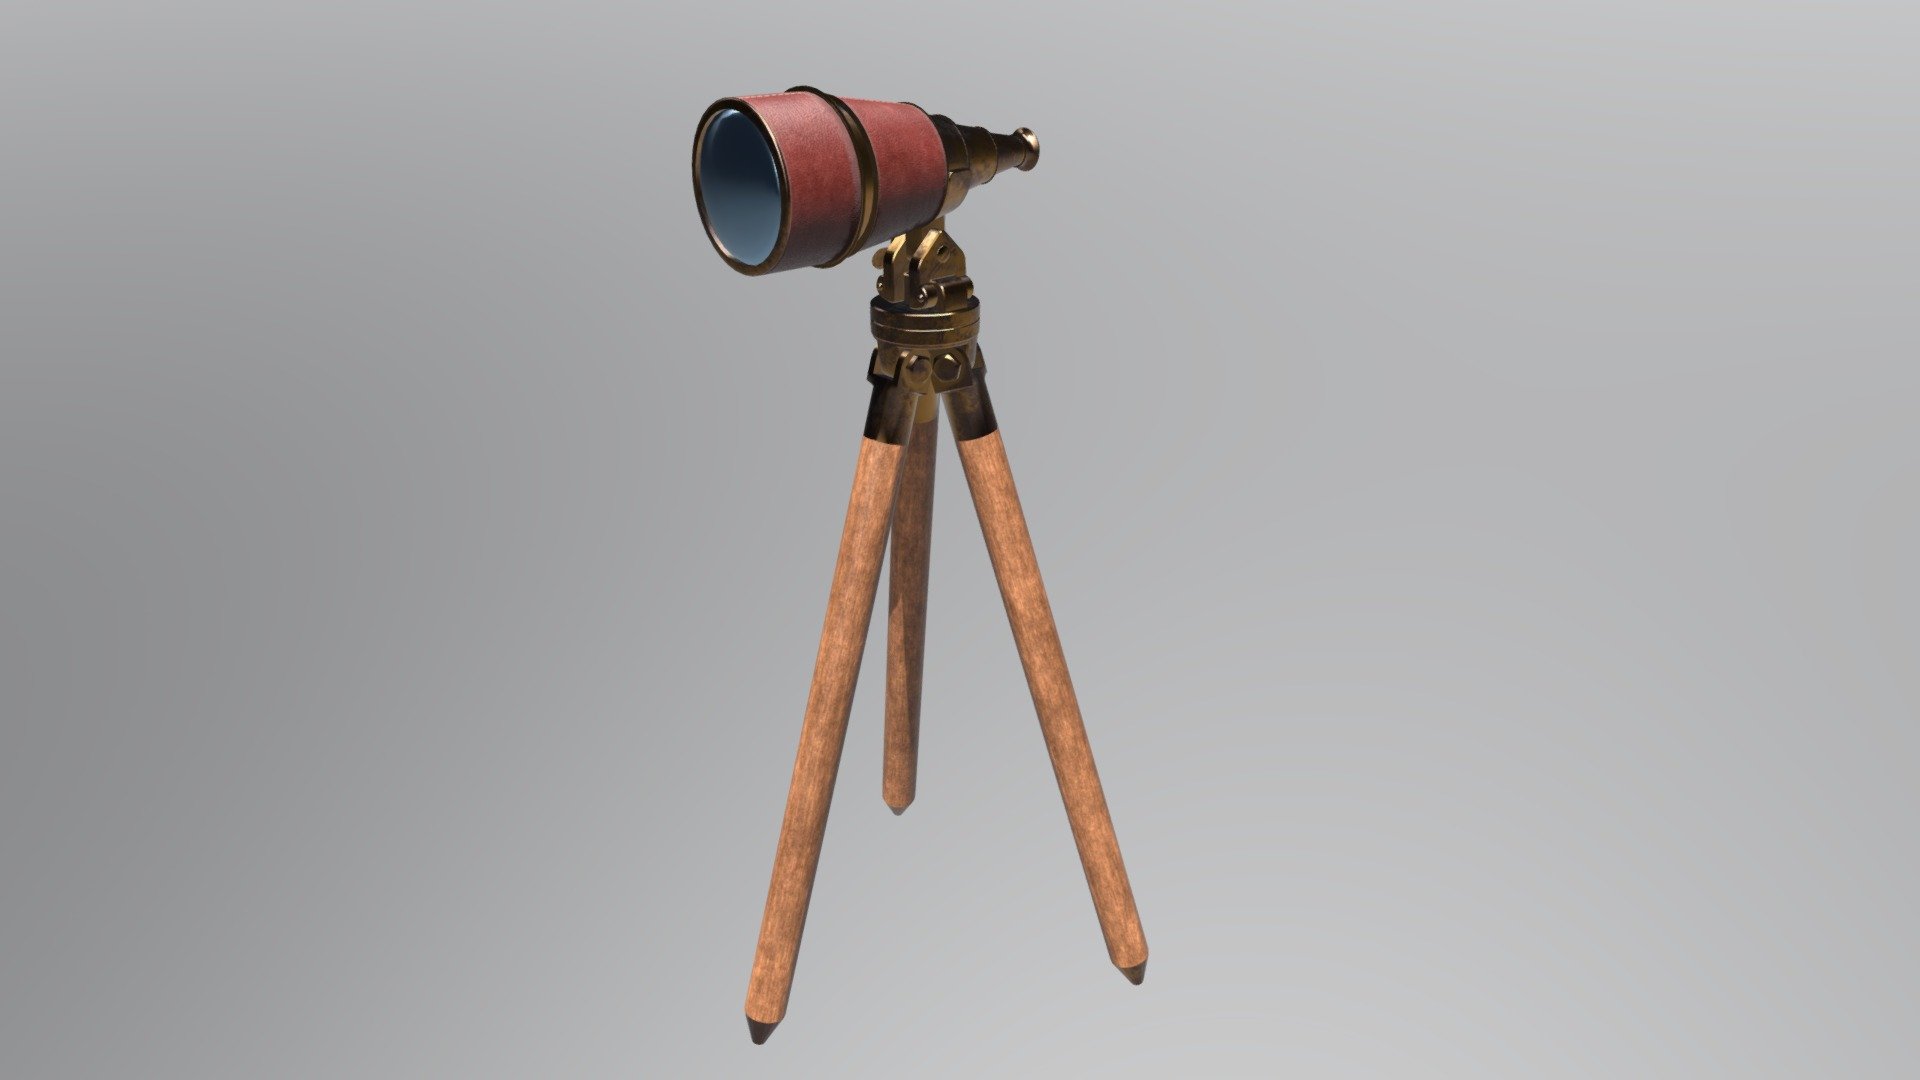 19th Century Modeling Telescope.
The tapered main barrel is covered in stitched brown leather and in very good condition with all stitching intact - Anamorphic telescope - 3D model by Tangyu 3d model